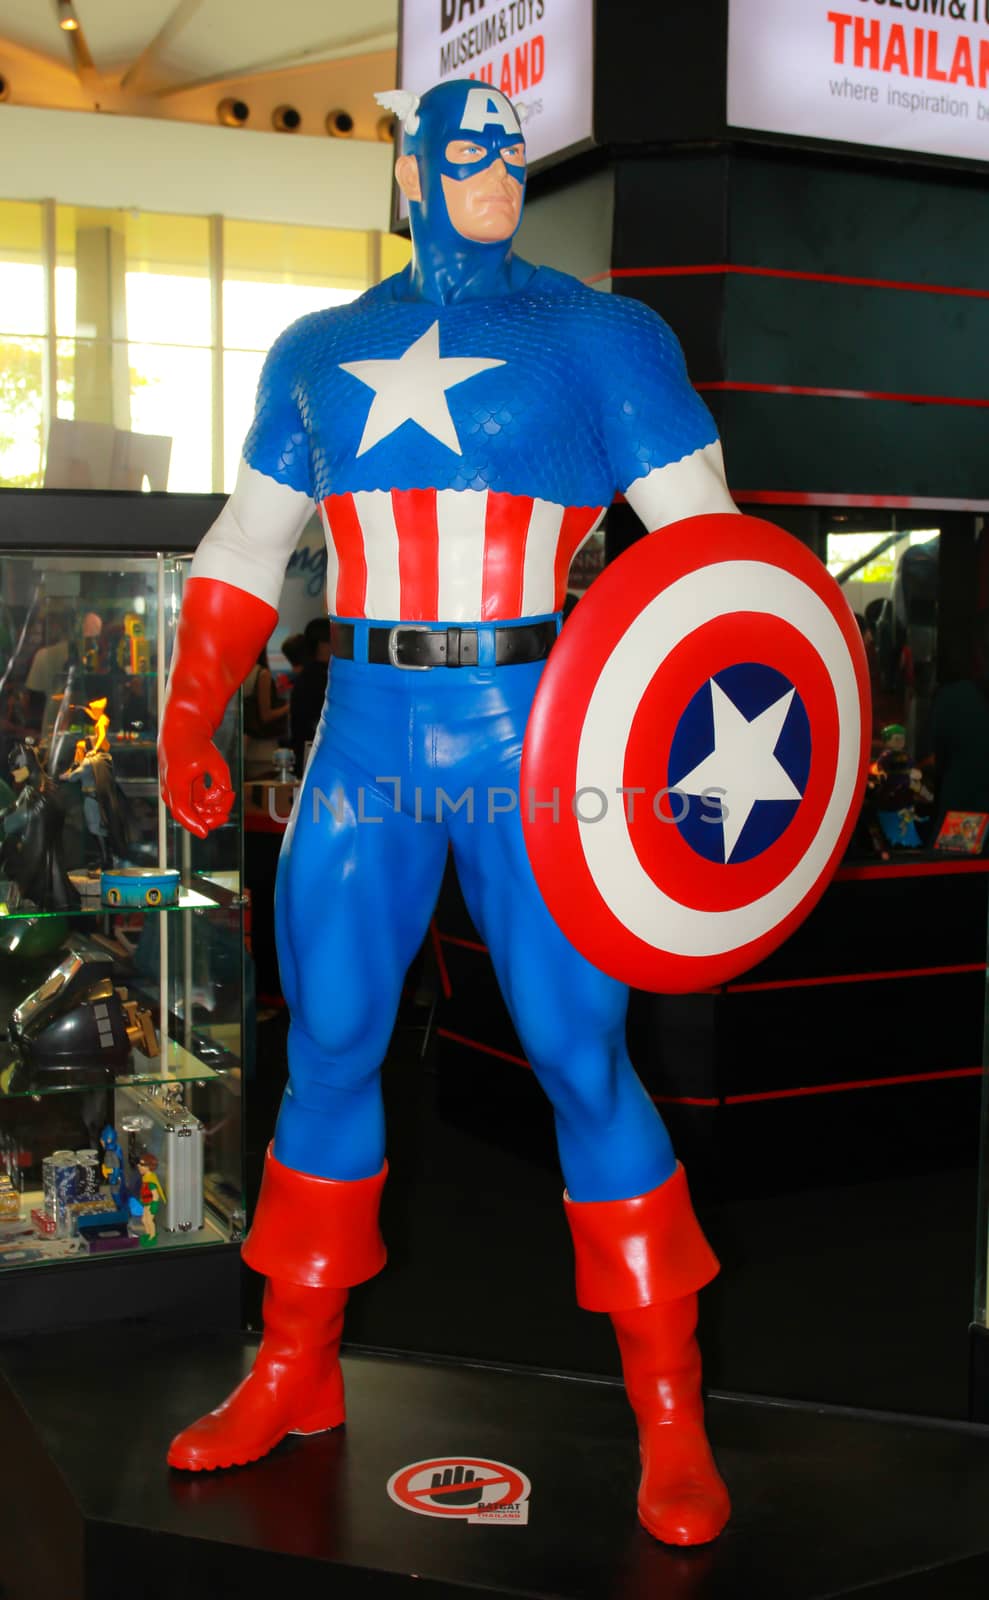 A model of the character Captain America from the movies and com by redthirteen